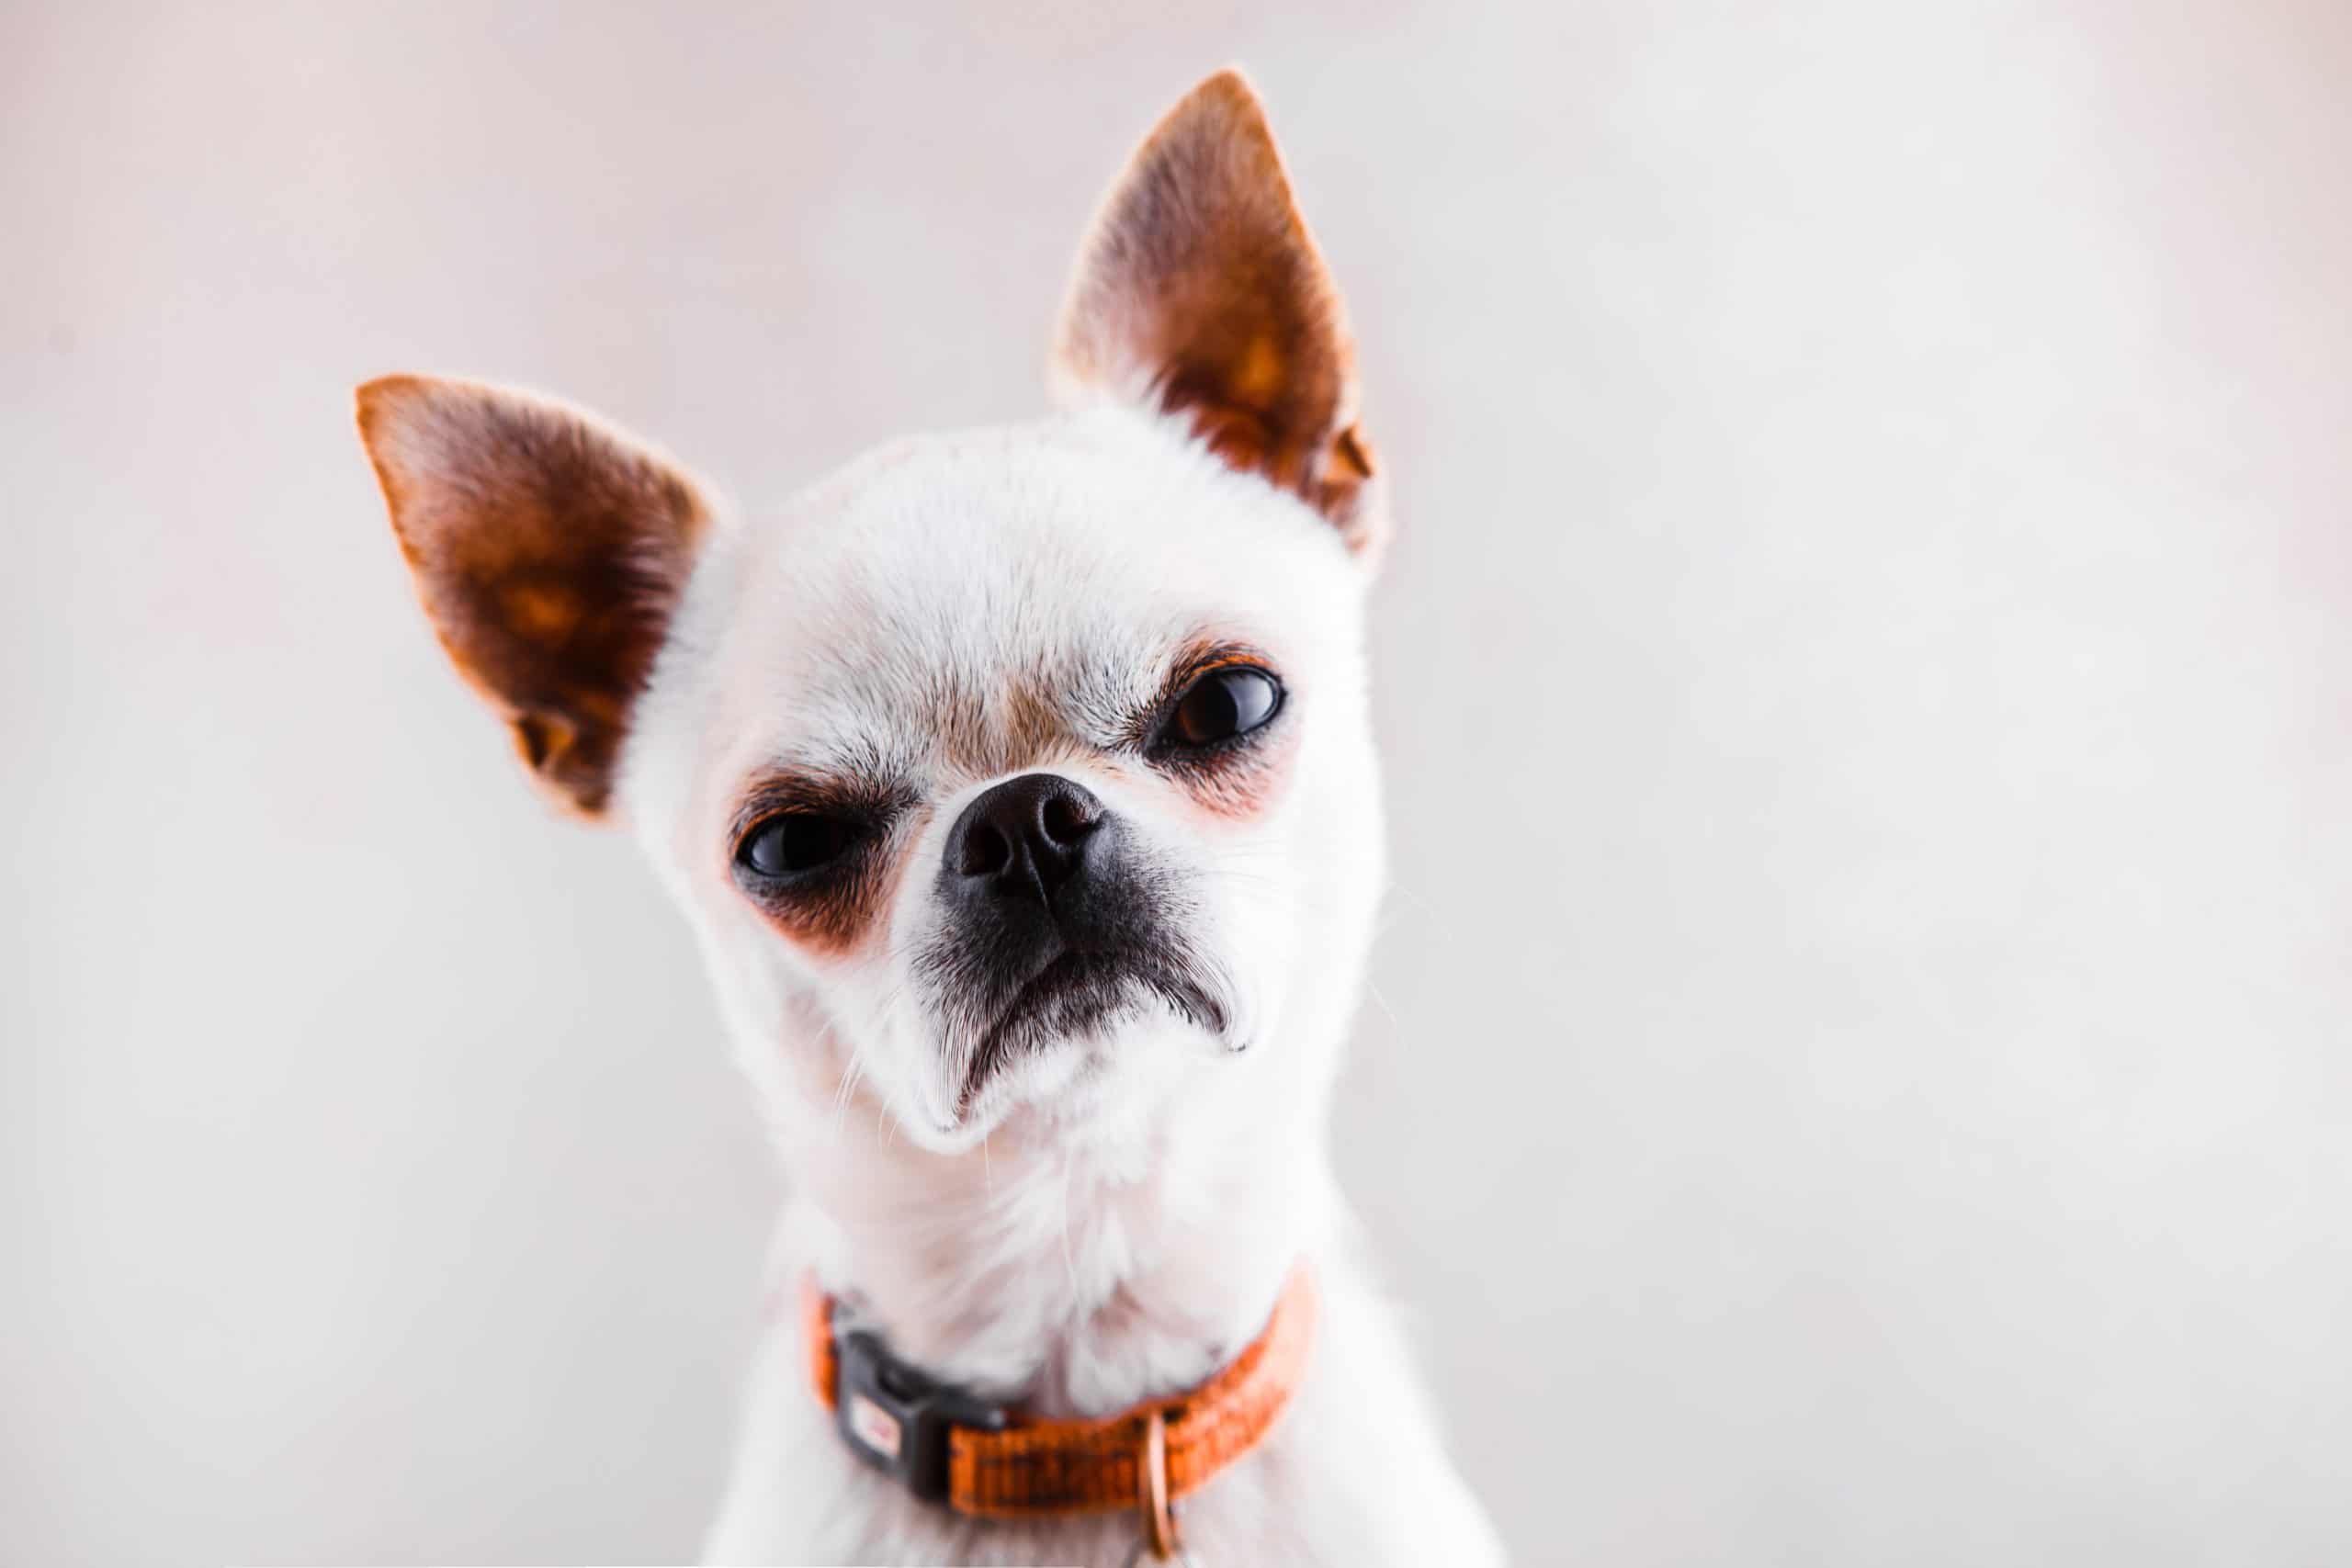 Evil Chihuahua on a light gray background looks into the camera with a displeased expression of the muzzle.